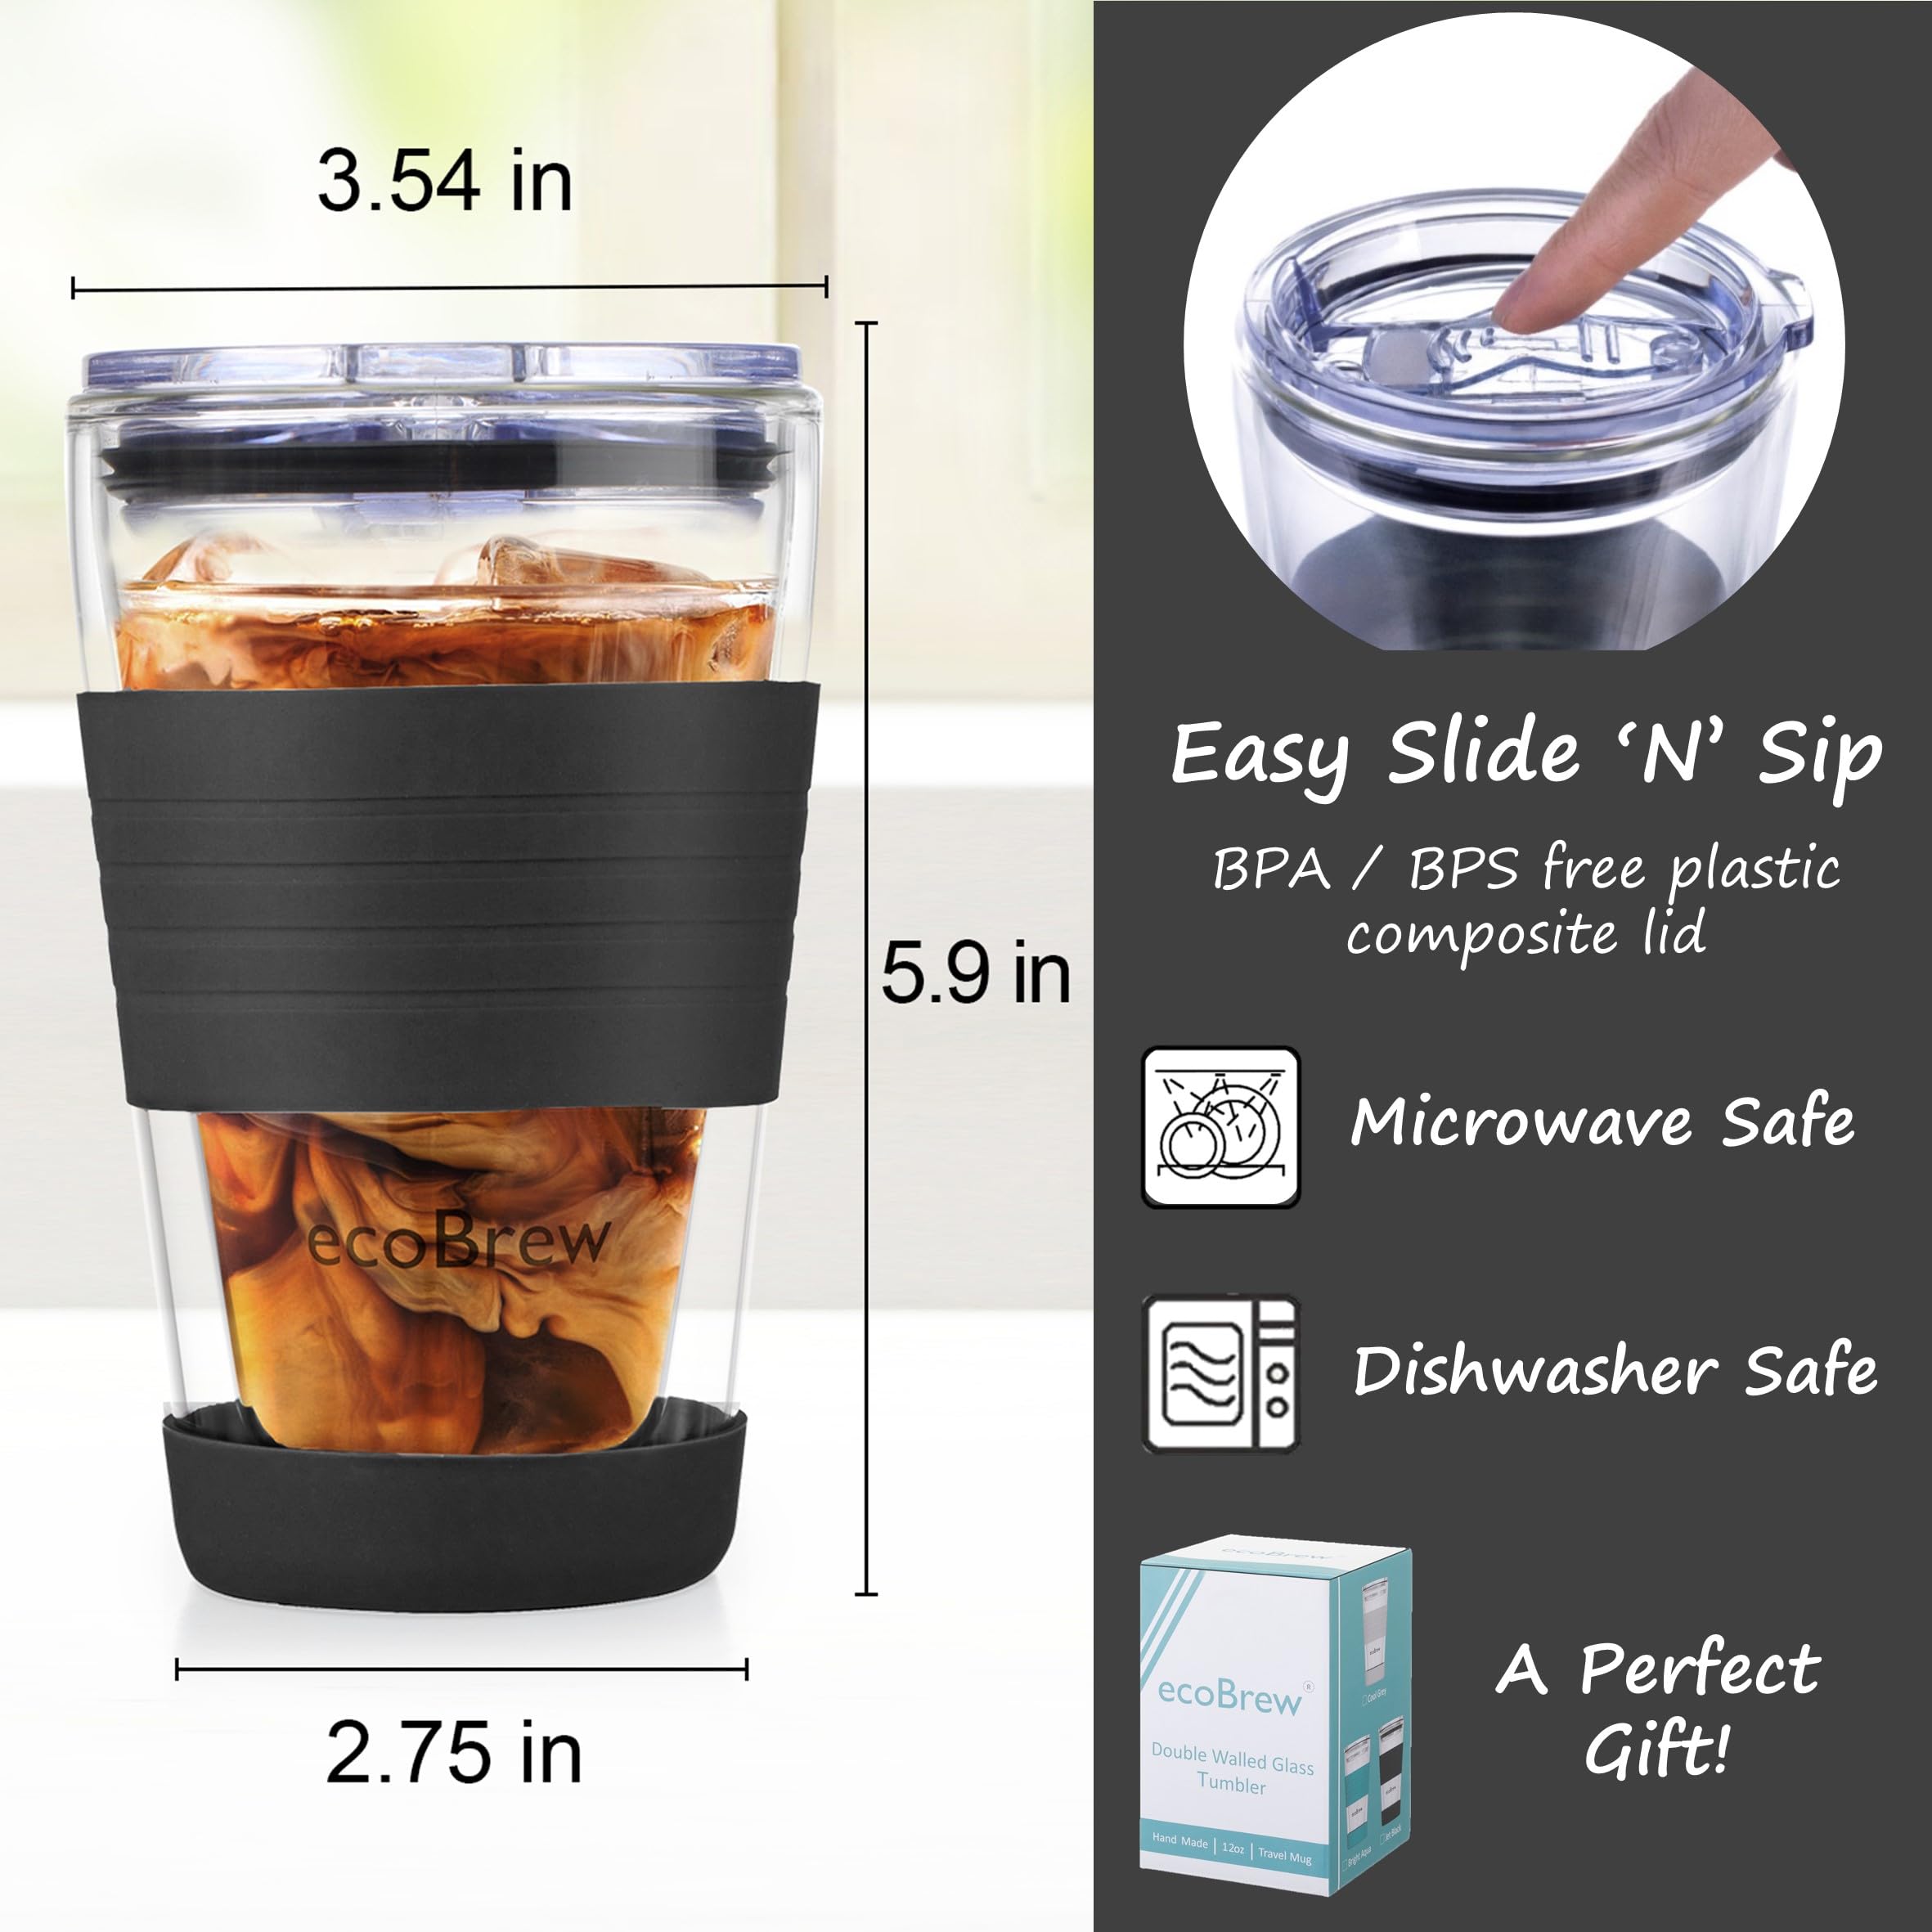 ecoBrew 12oz Double Wall Glass Tumbler with Lid, Dishwasher Safe & Microwavable Coffee Glass Travel Mug, Clear Reusable Coffee Cup To Go for Hot & Cold Drinks